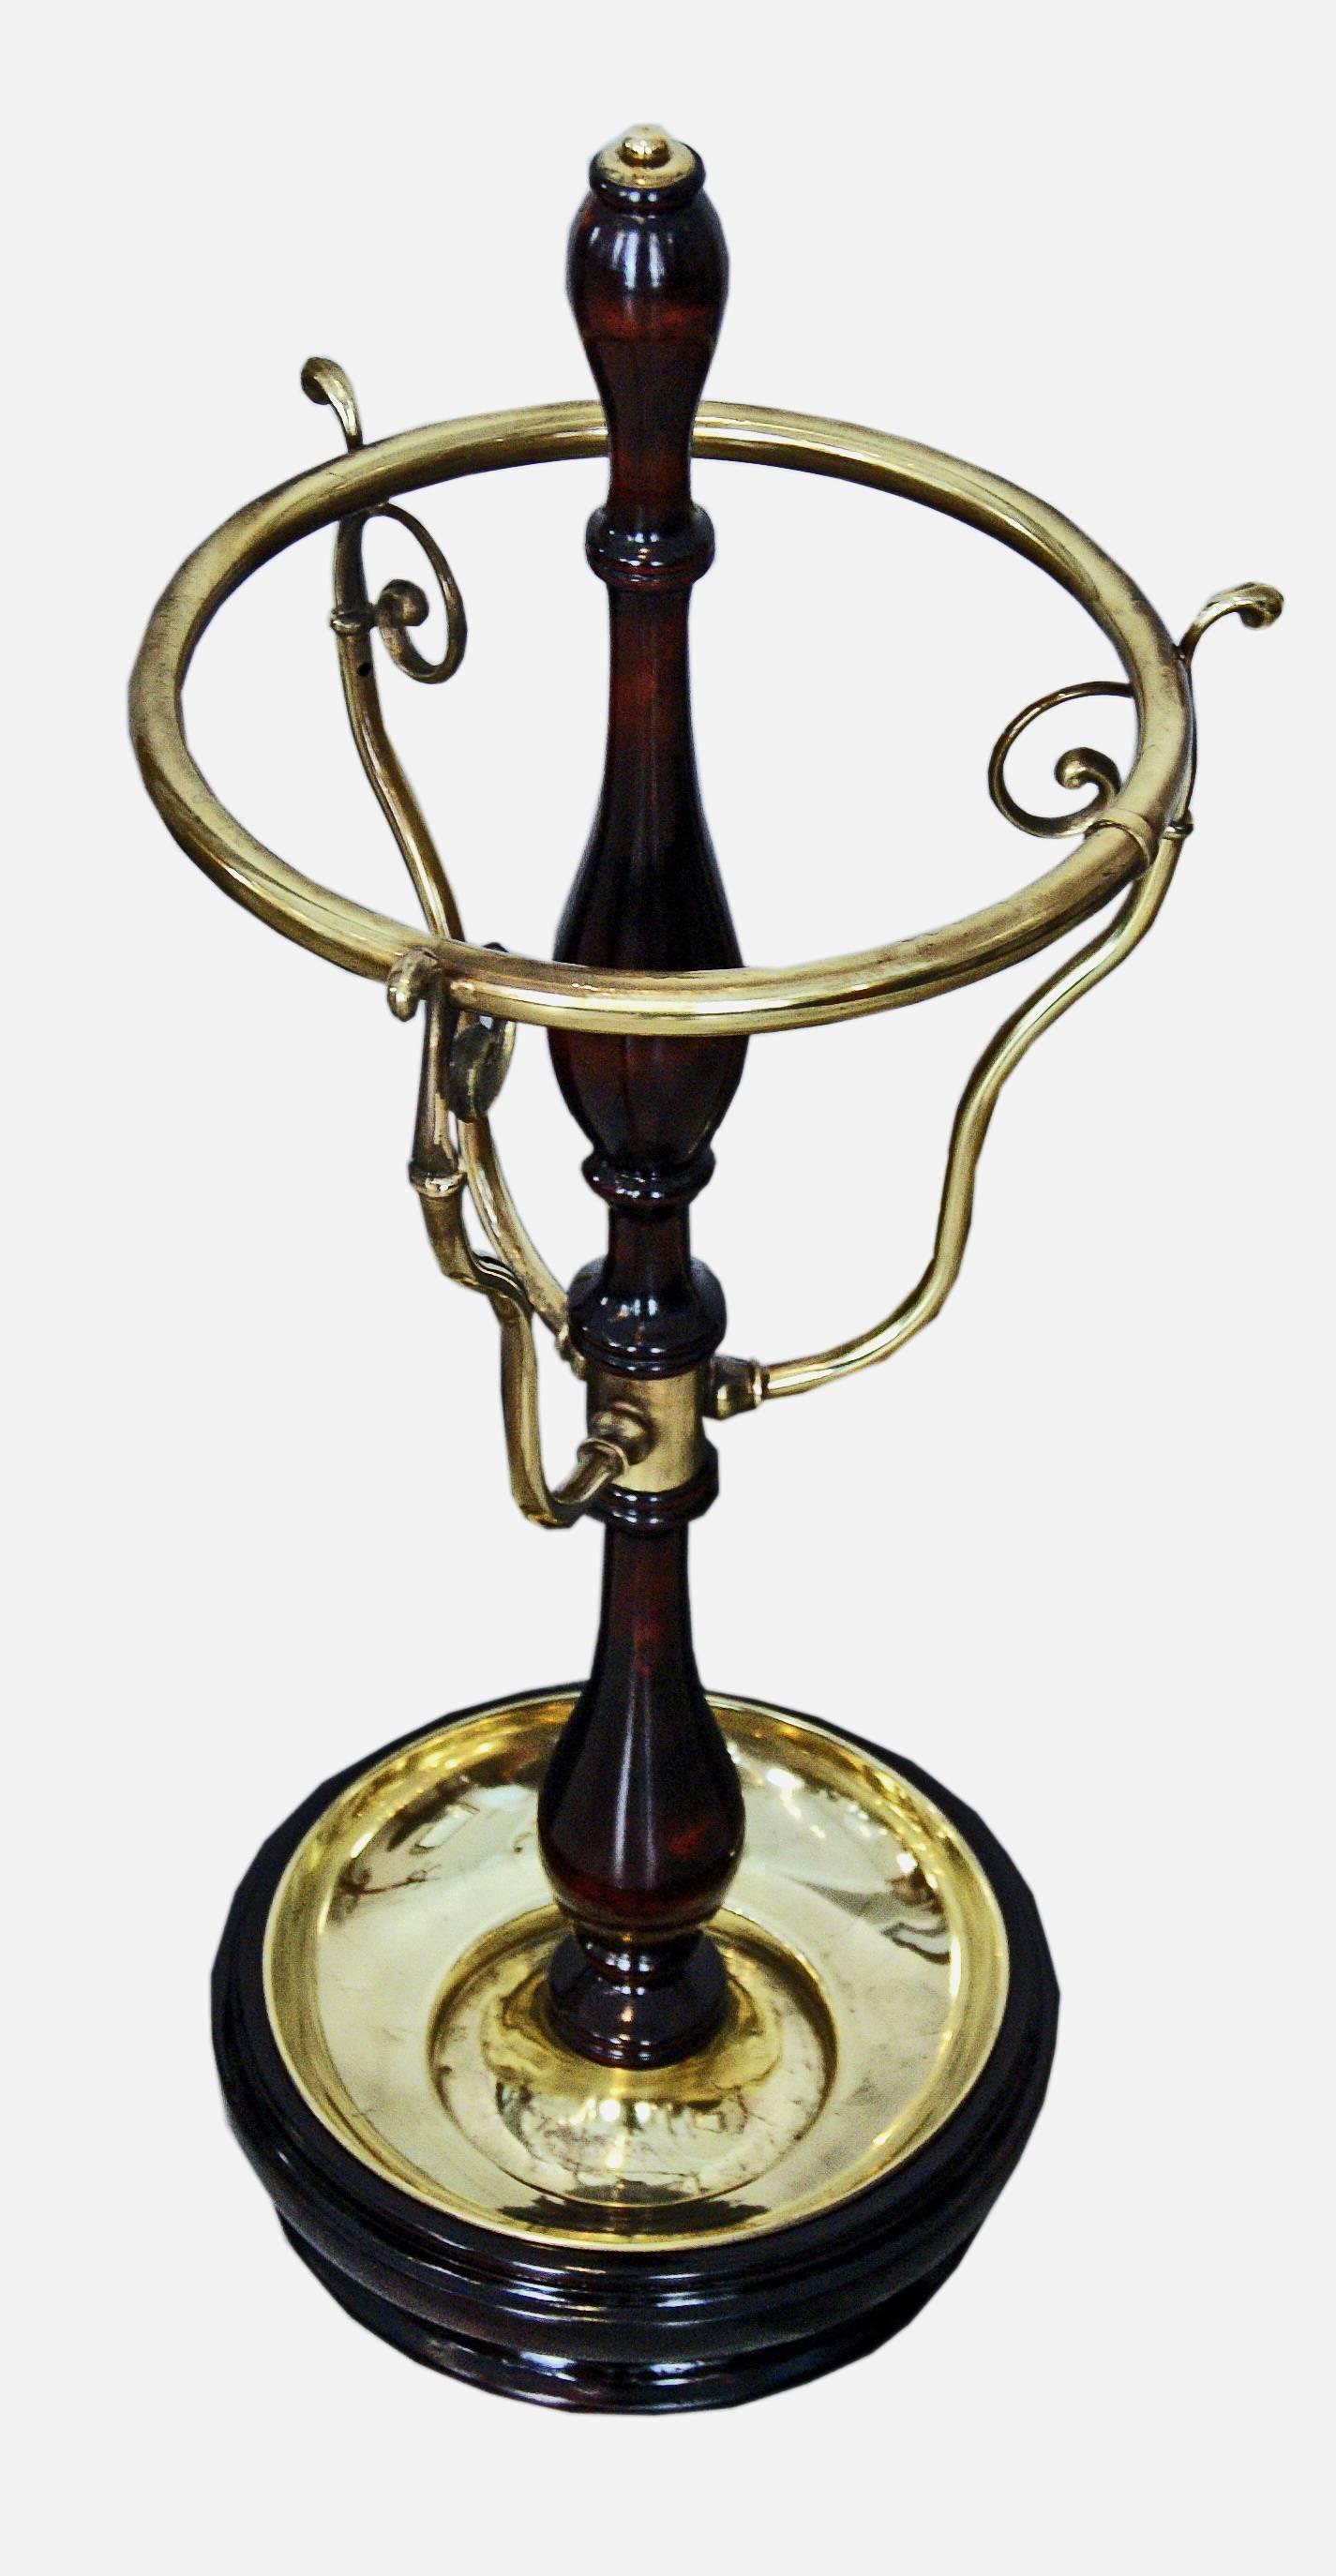 Austrian Vienna Art Nouveau Umbrella Stand Wood Mahogany Stained Brass Fittings